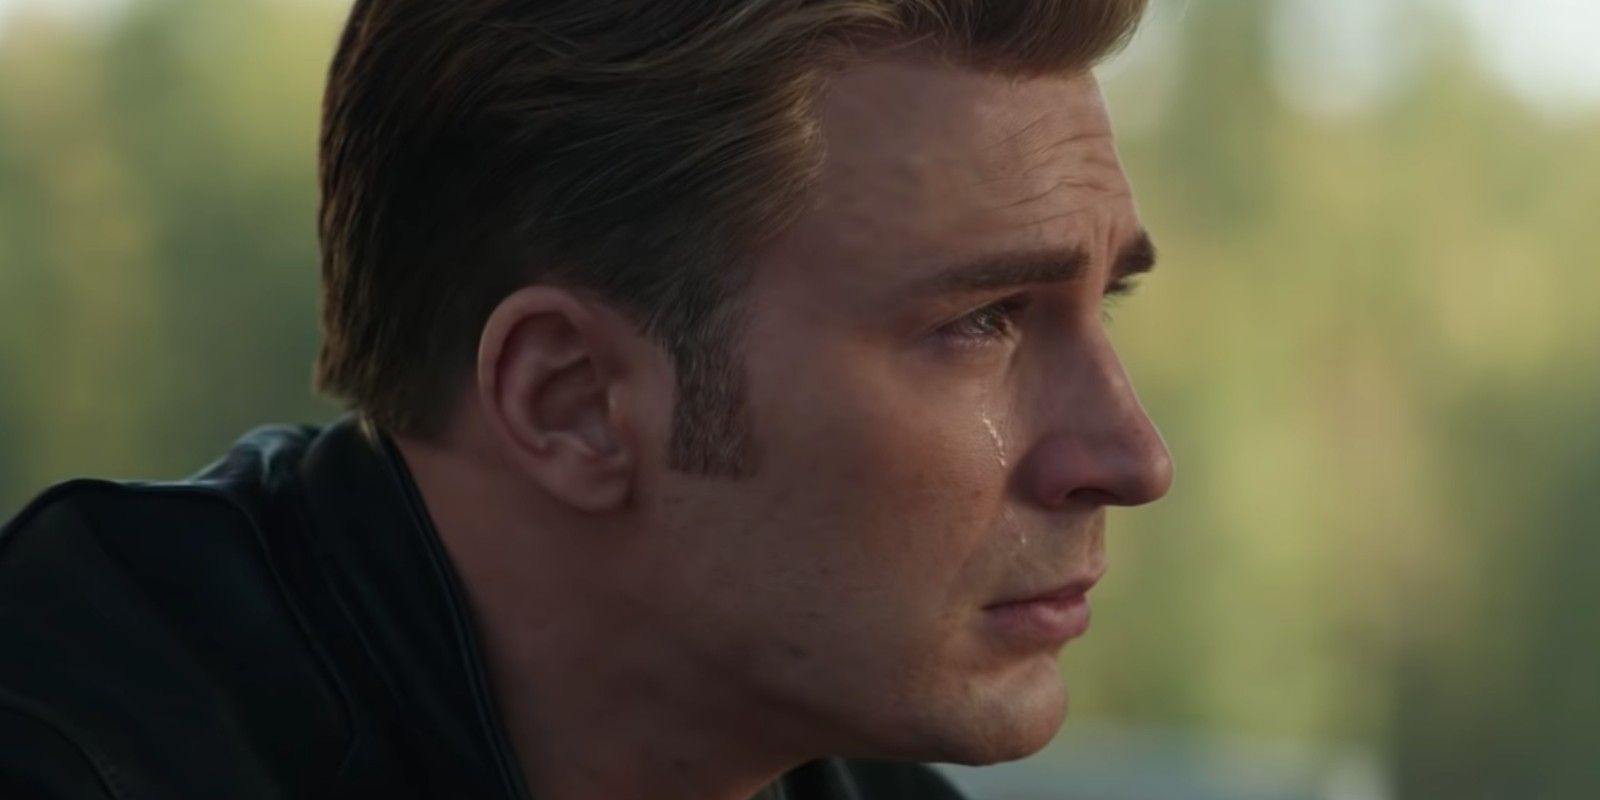 The Greatest Quotes in Avengers: Endgame